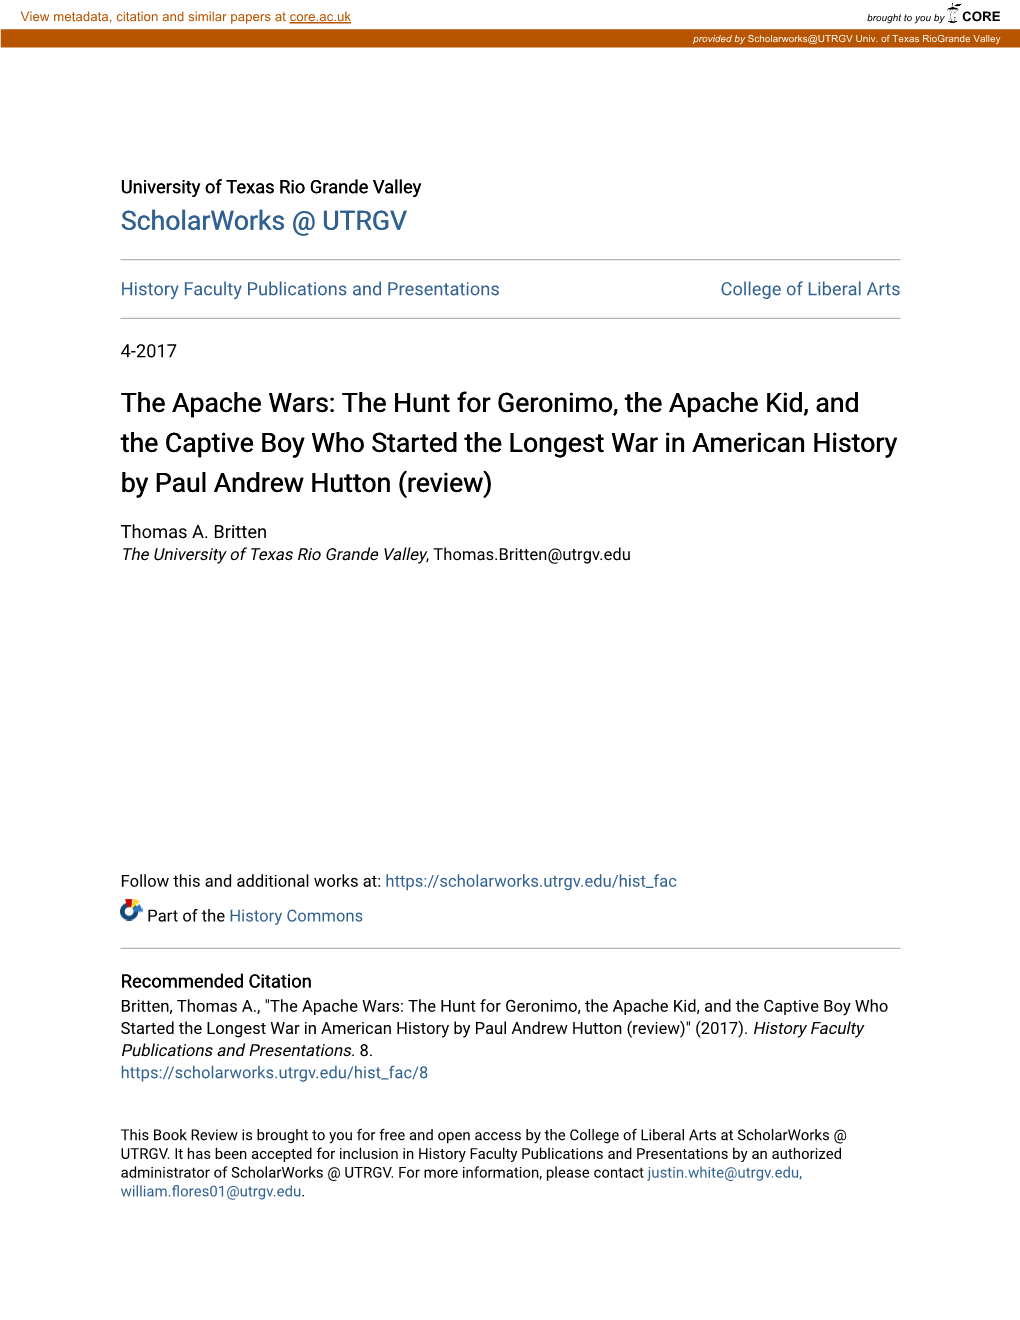 The Apache Wars: the Hunt for Geronimo, the Apache Kid, and the Captive Boy Who Started the Longest War in American History by Paul Andrew Hutton (Review)